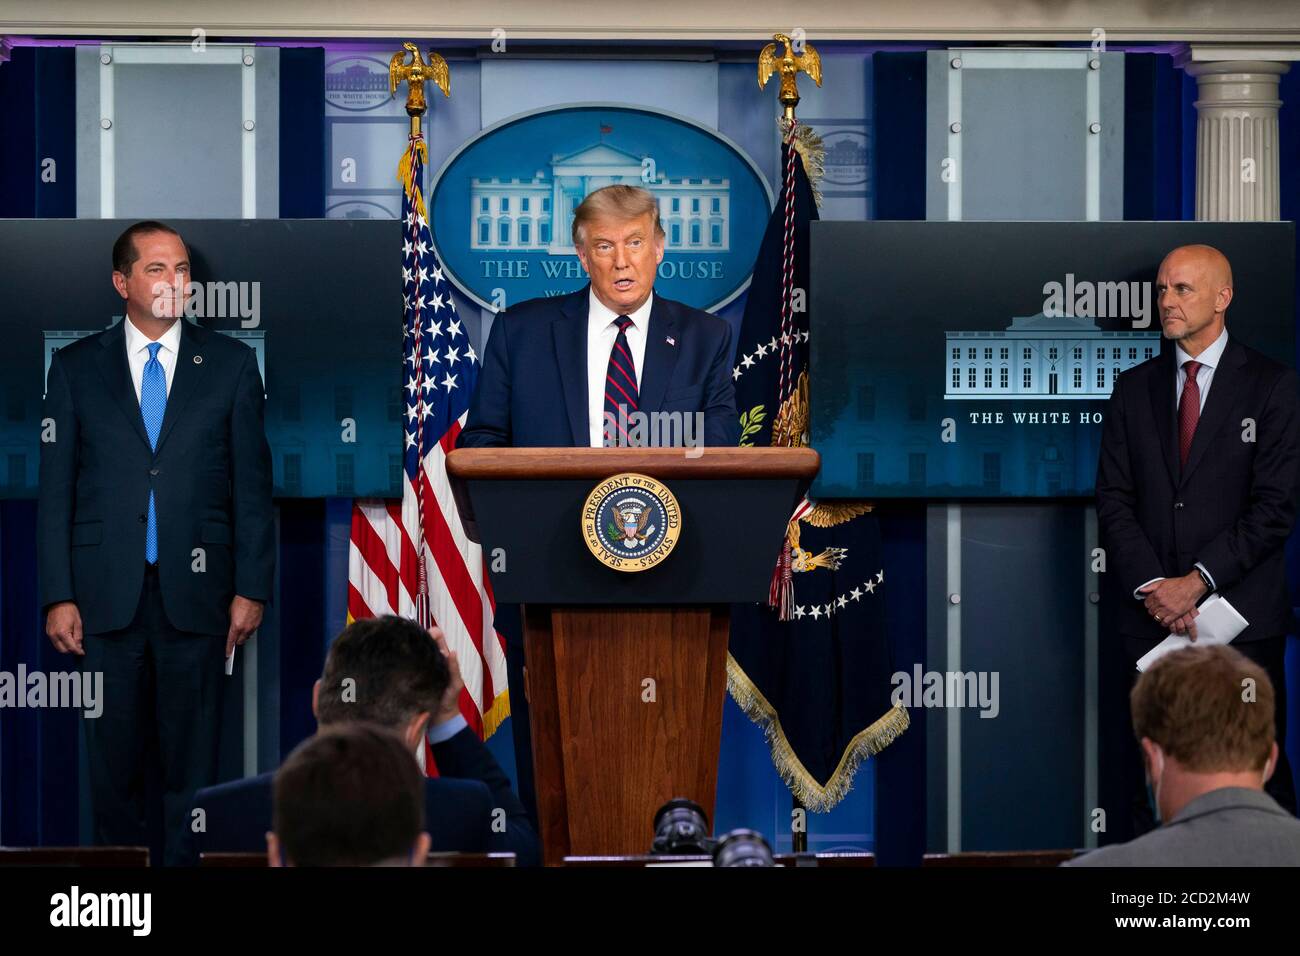 WASHINGTON DC, USA - 23 August 2020 - US President Donald J Trump, joined by Secretary of Health and Human Services Alex Azar and Commissioner of the Stock Photo